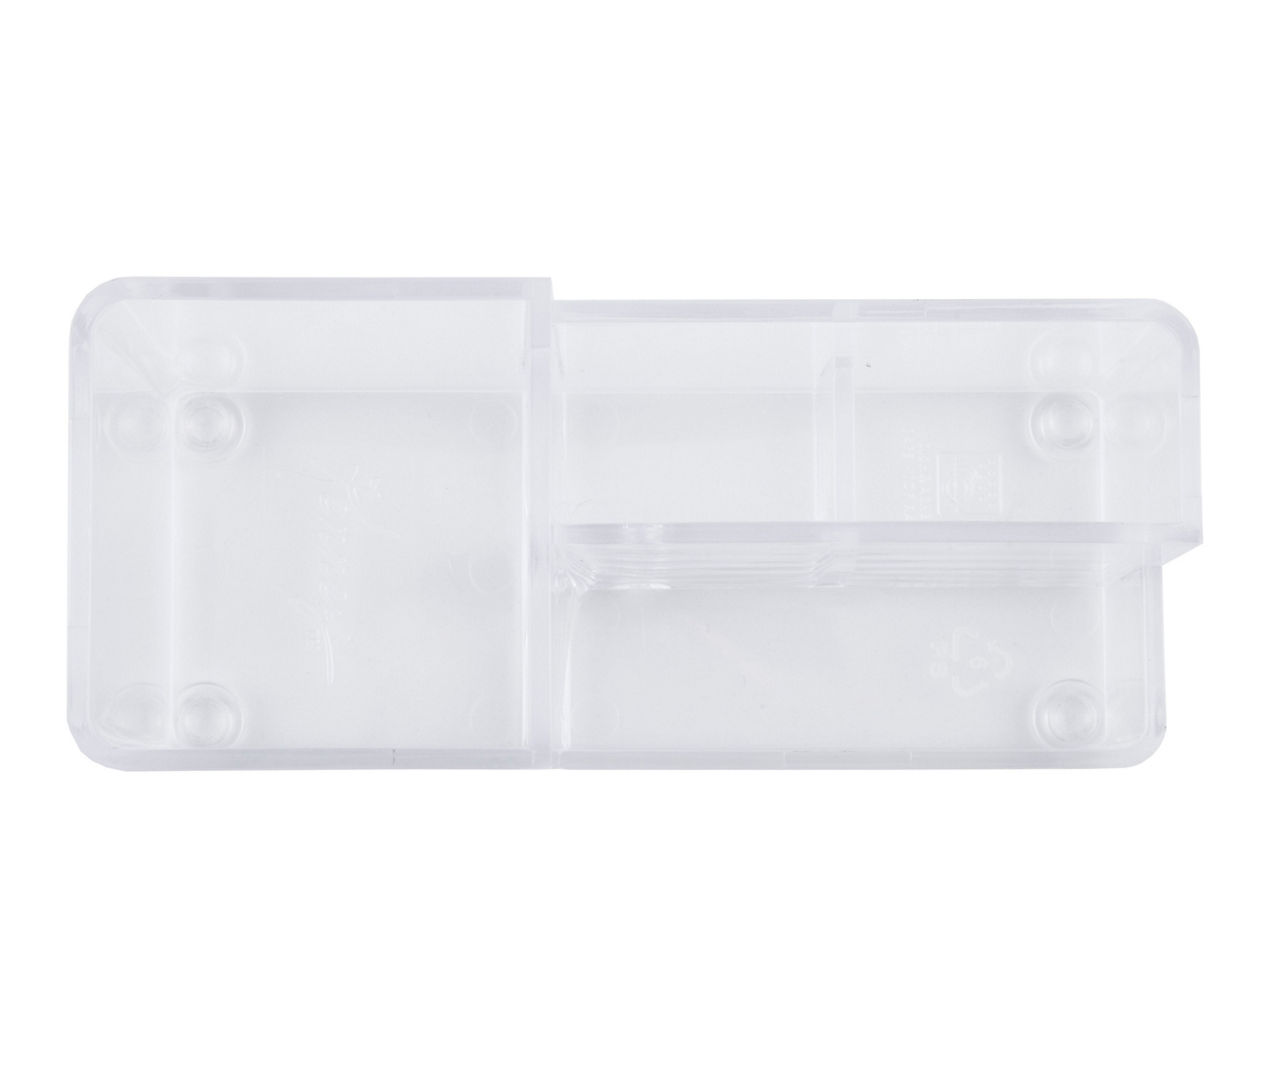 Kenney Storage Made Simple Clear 4-Compartment Bathroom Countertop Organizer,  2-Pack